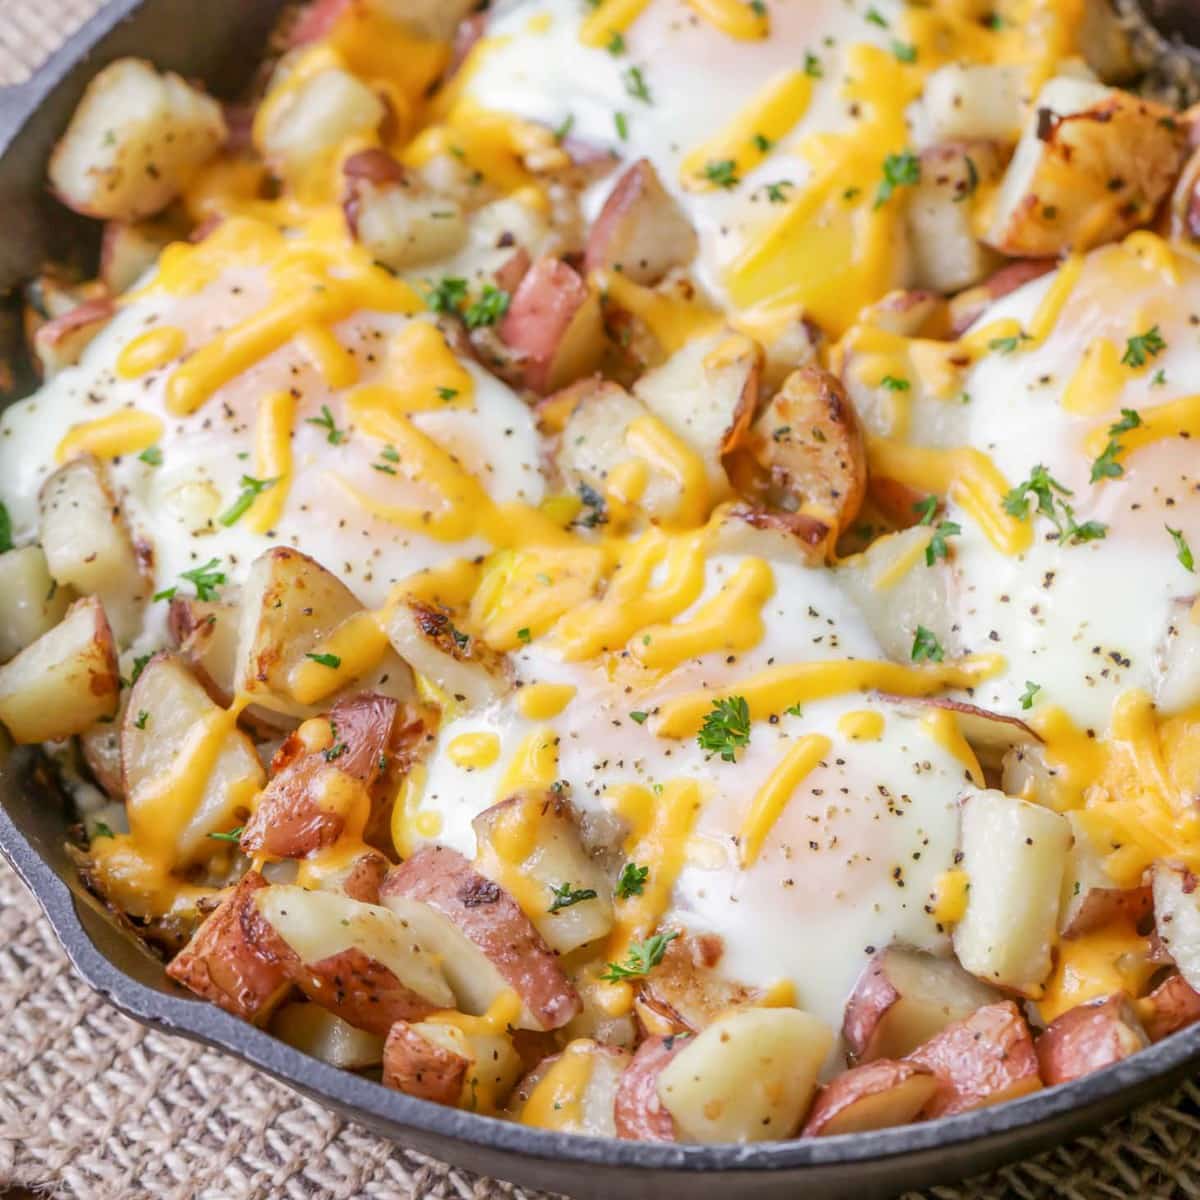 Thanksgiving breakfast ideas - a skillet filled with favorite eggs and potatoes.